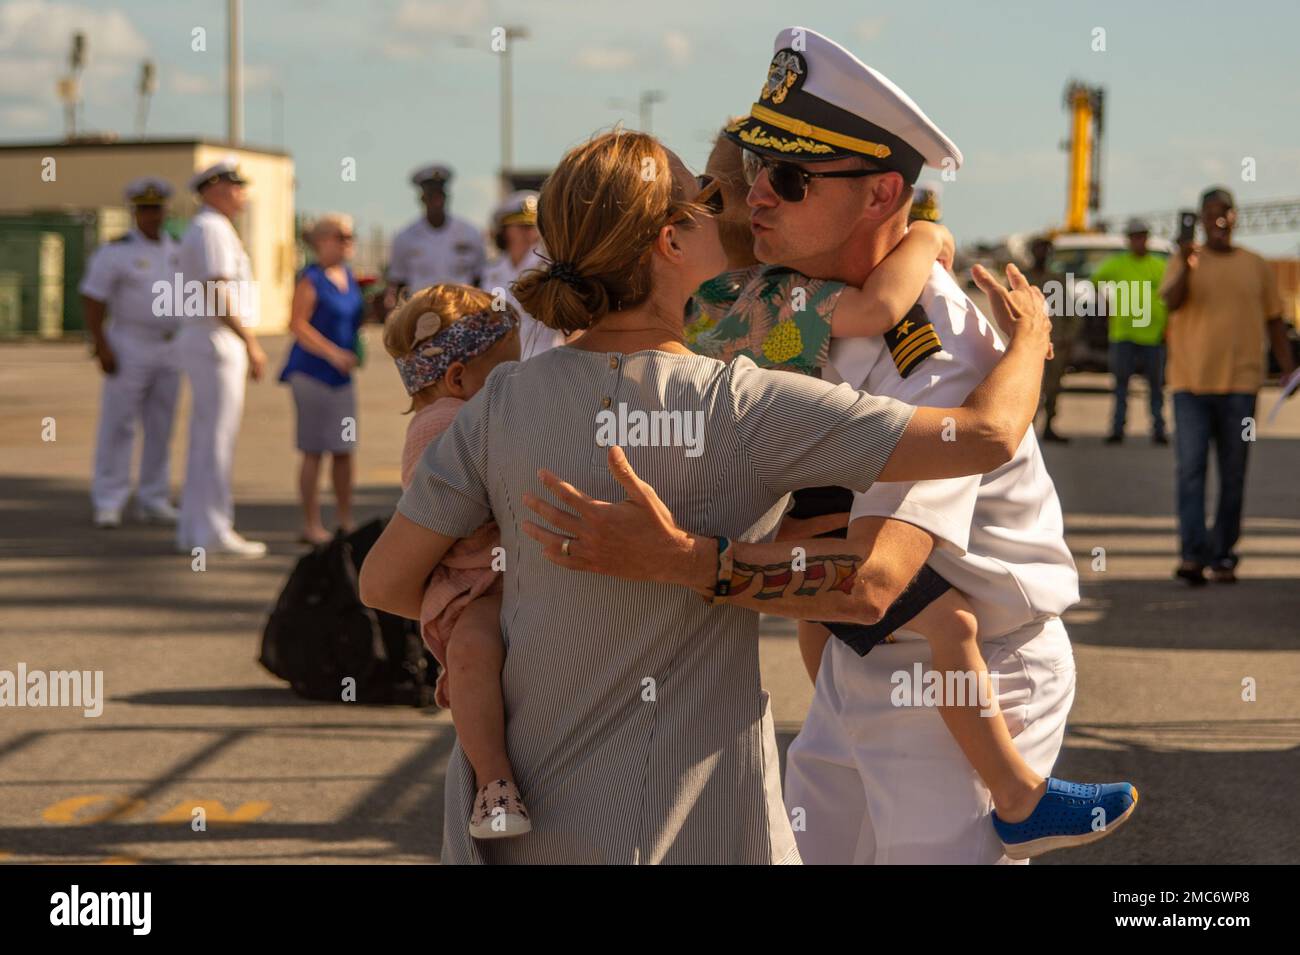 220626-N-UP745-1211  NAVAL STATION MAYPORT, Fla. (June 26, 2022) Cmdr. Robert Keller, executive officer of the Arleigh Burke-class guided-missile destroyer USS Jason Dunham (DDG 109), reunites with his family as the ship returns to Naval Station Mayport, Florida after a regularly scheduled deployment in support of maritime security operations and theater security cooperation efforts, June 26. Jason Dunham was deployed as part of the Harry S. Truman Carrier Strike Group. Stock Photo